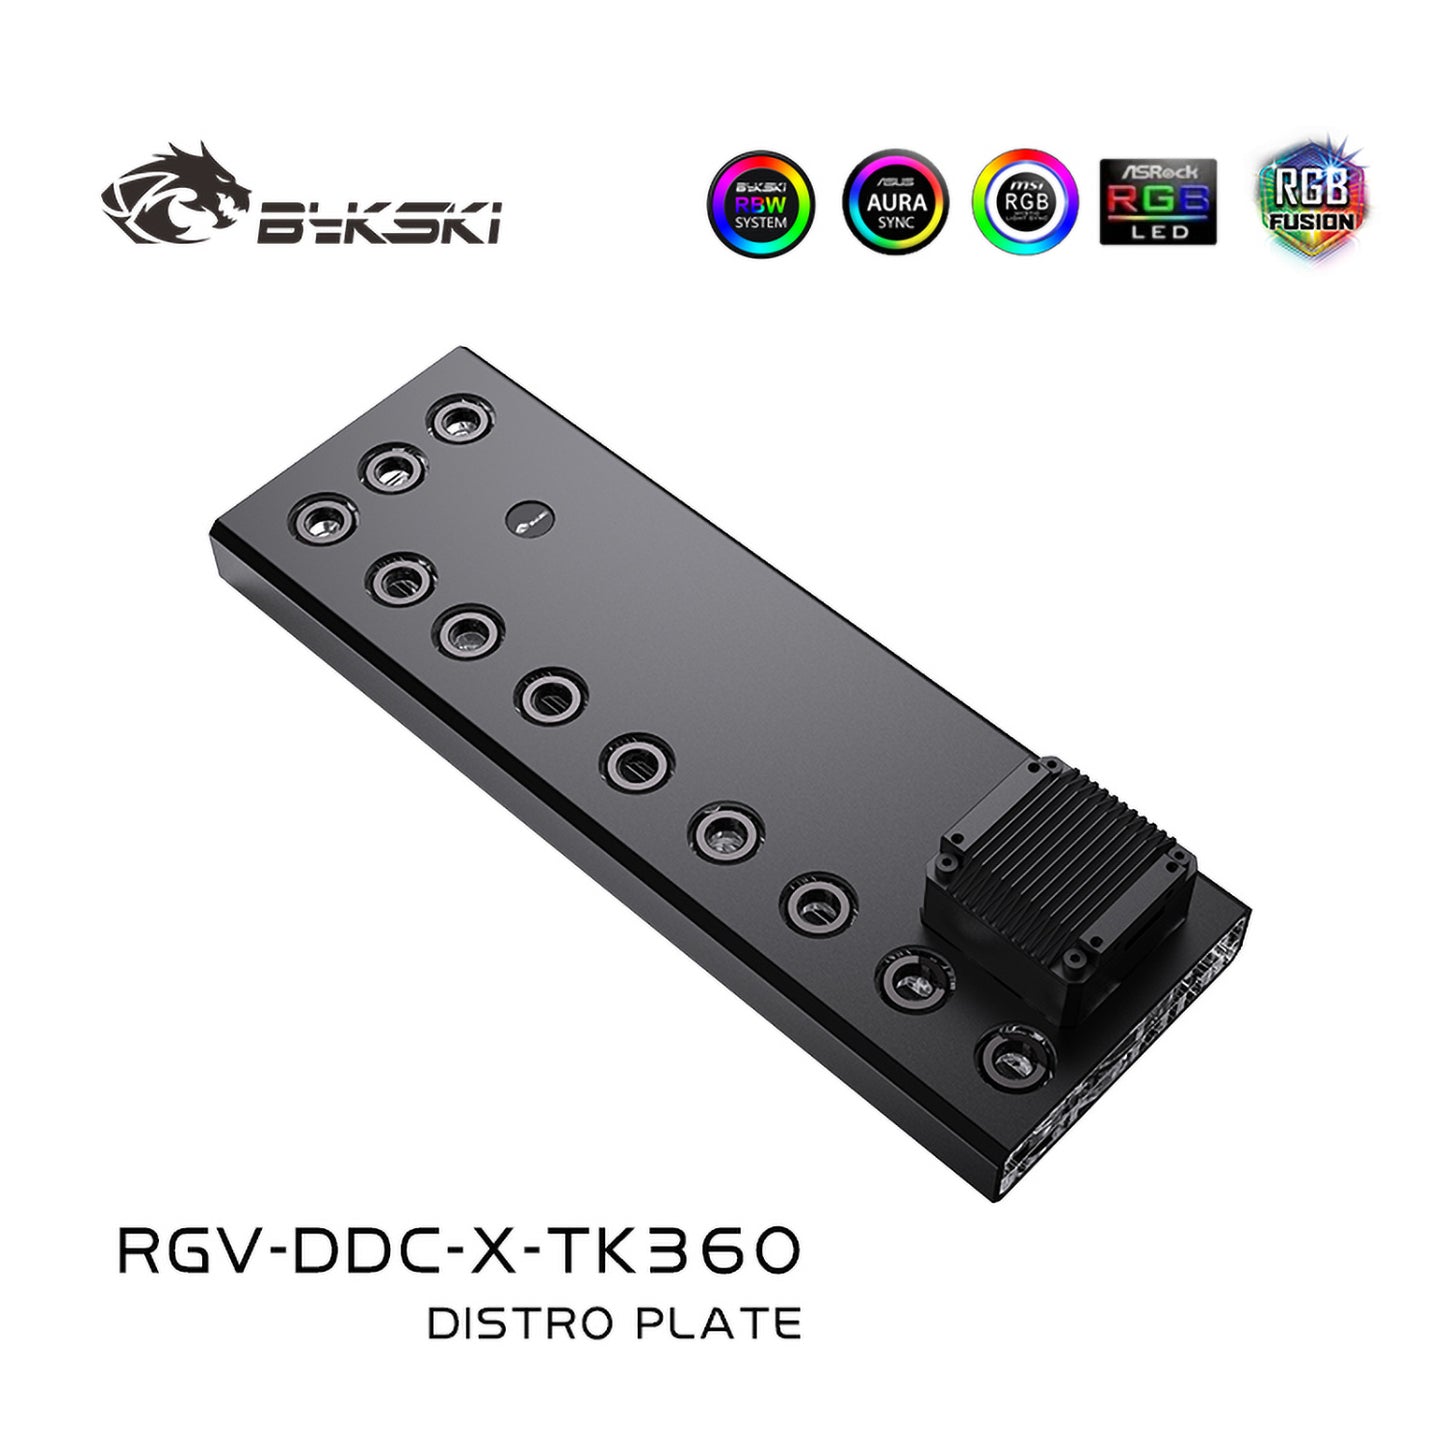 Bykski Universal Type Distro Plate, Use The Installation Space Of The Radiator To Fix, Black Matte Acrylic Material, Waterway Board For Water Cooling System, RGV-DDC-X-TK120 RGV-DDC-X-TK240 RGV-DDC-X-TK360